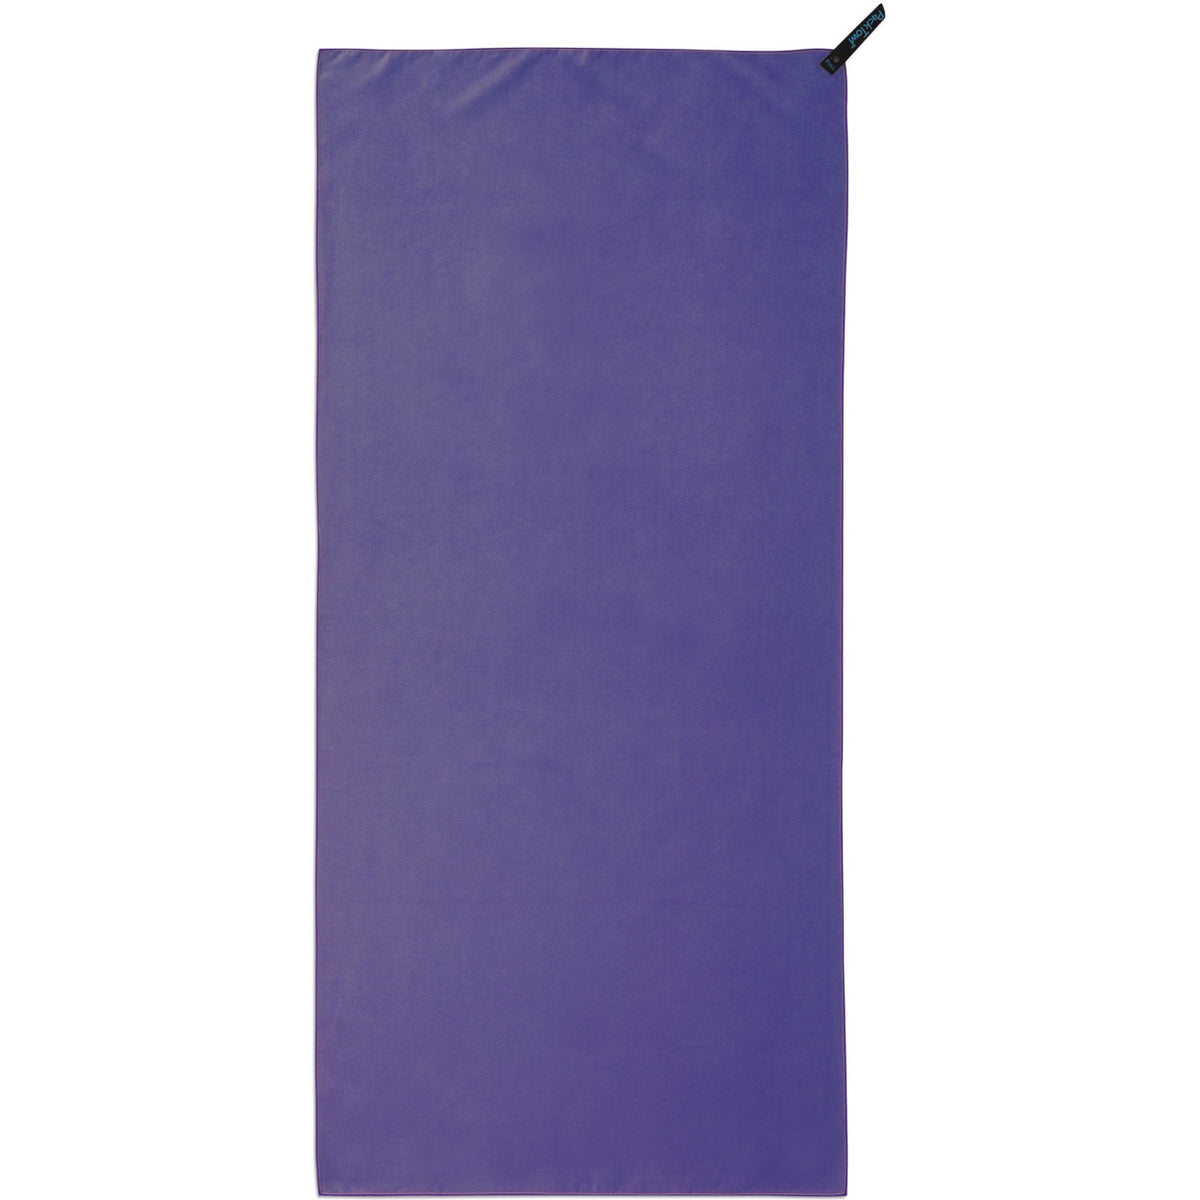 Packtowl Personal Towel - Hand size in violet colour